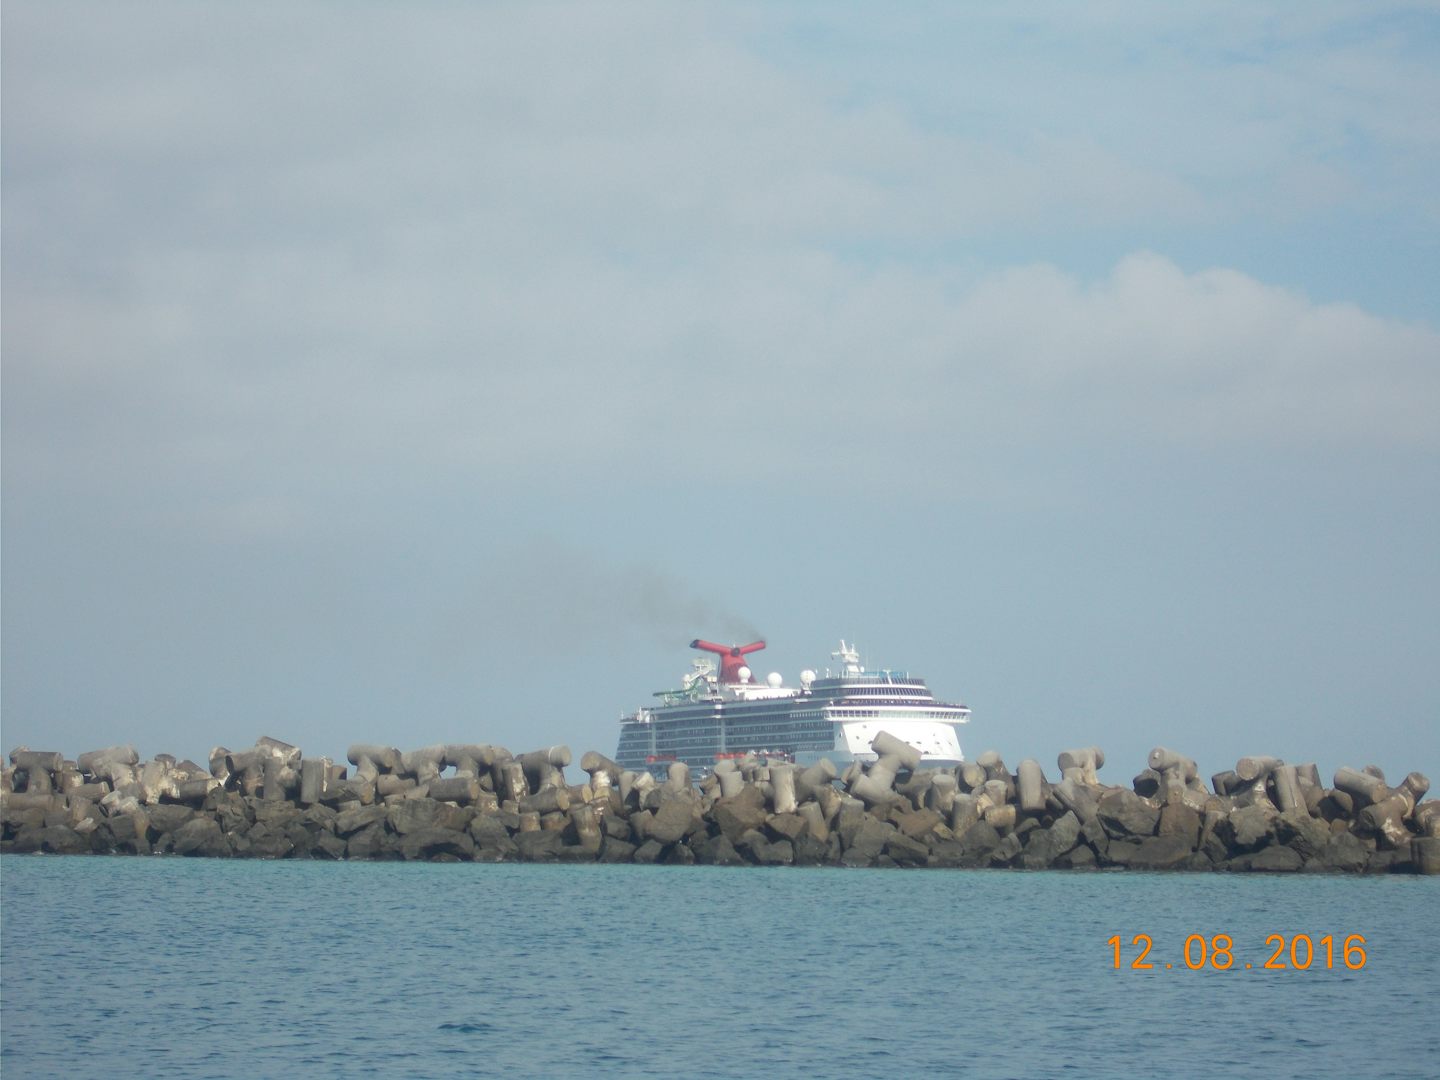 Another Carnival ship arriving in Nassau